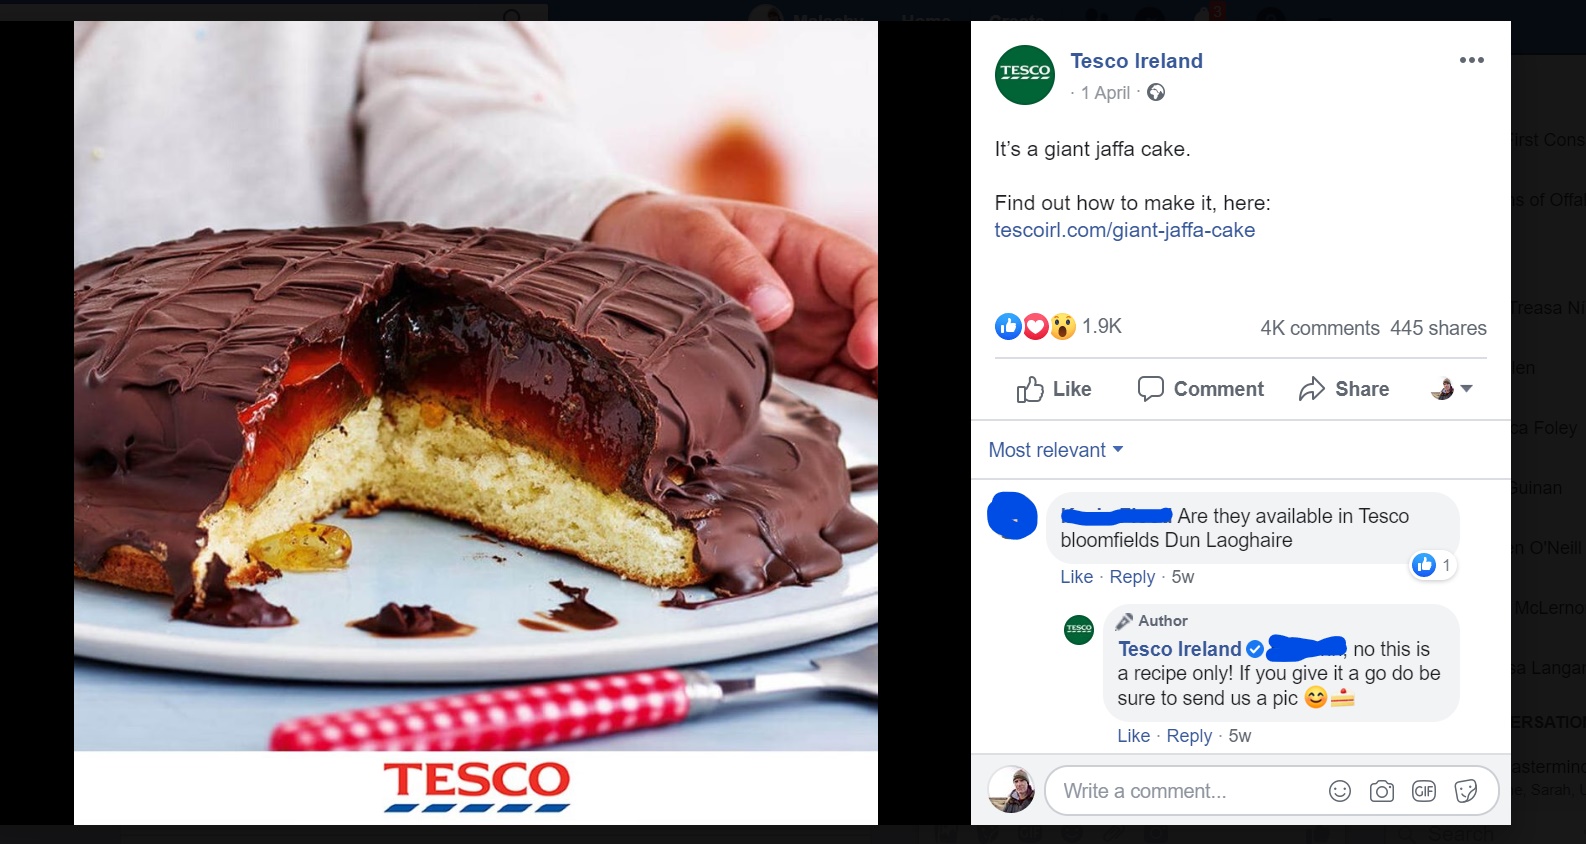 Tesco encouraging some ambitious home-baking projects too!